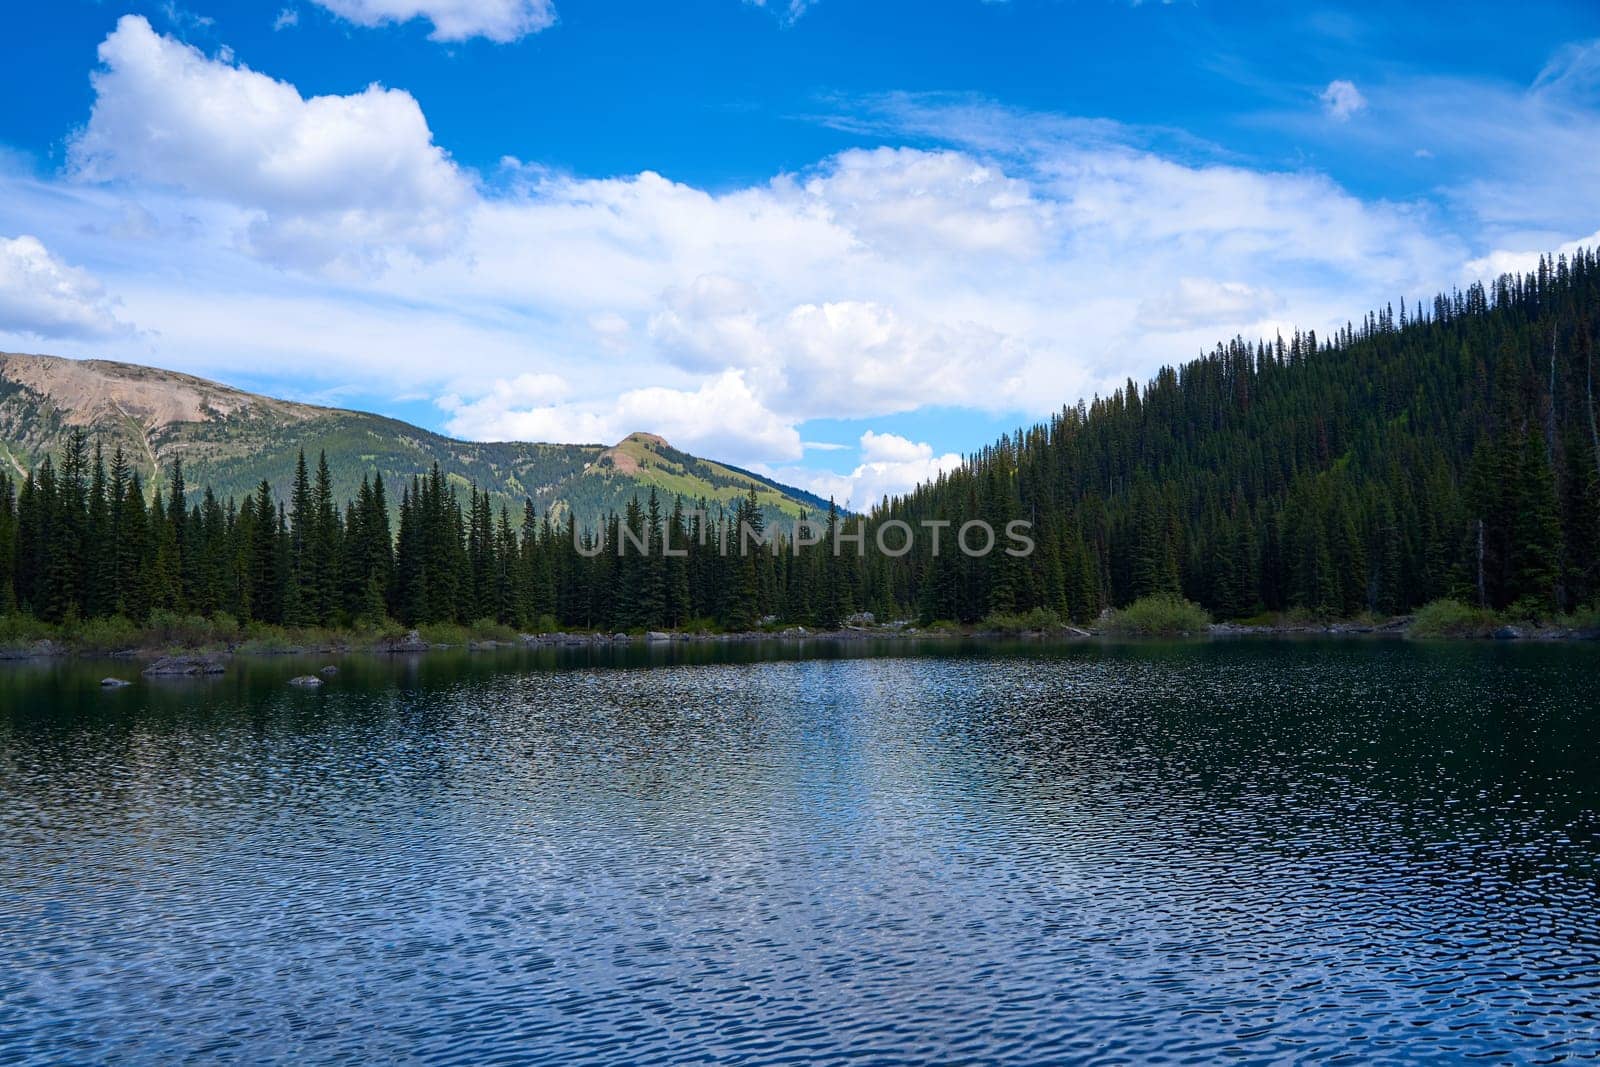 Incredibly beautiful transparent, emerald calm lake with reflection of rocky mountain on the Black Prince Cirque Trail. Majestic Canadian mountains with snow on sunny summer day in Alberta, Kananaskis by Try_my_best